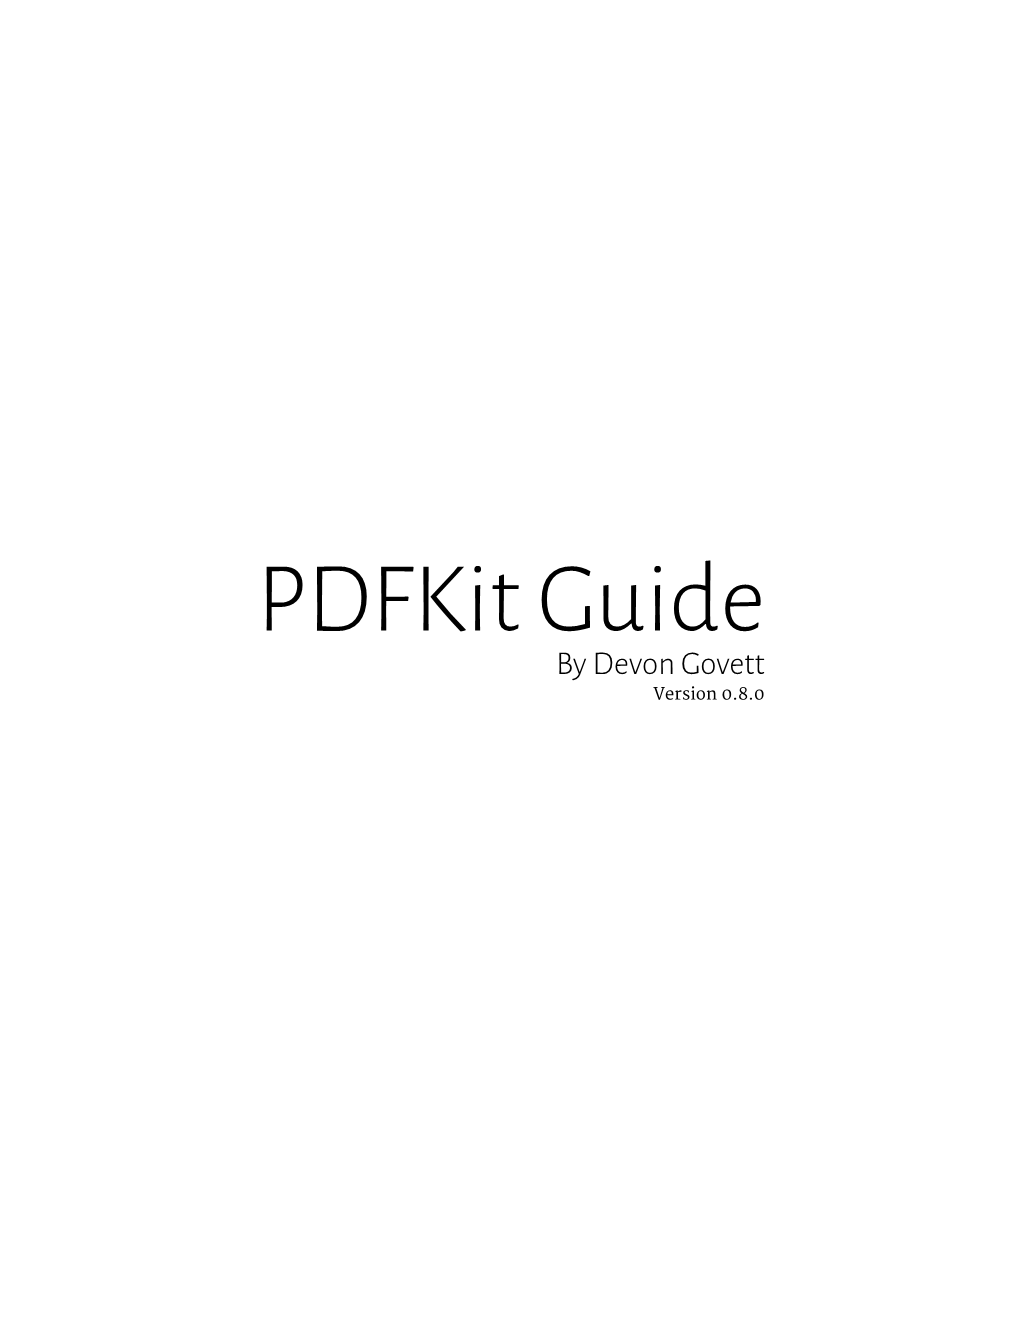 Pdfkit Guide by Devon Govett Version 0.8.0 Getting Started with Pdfkit